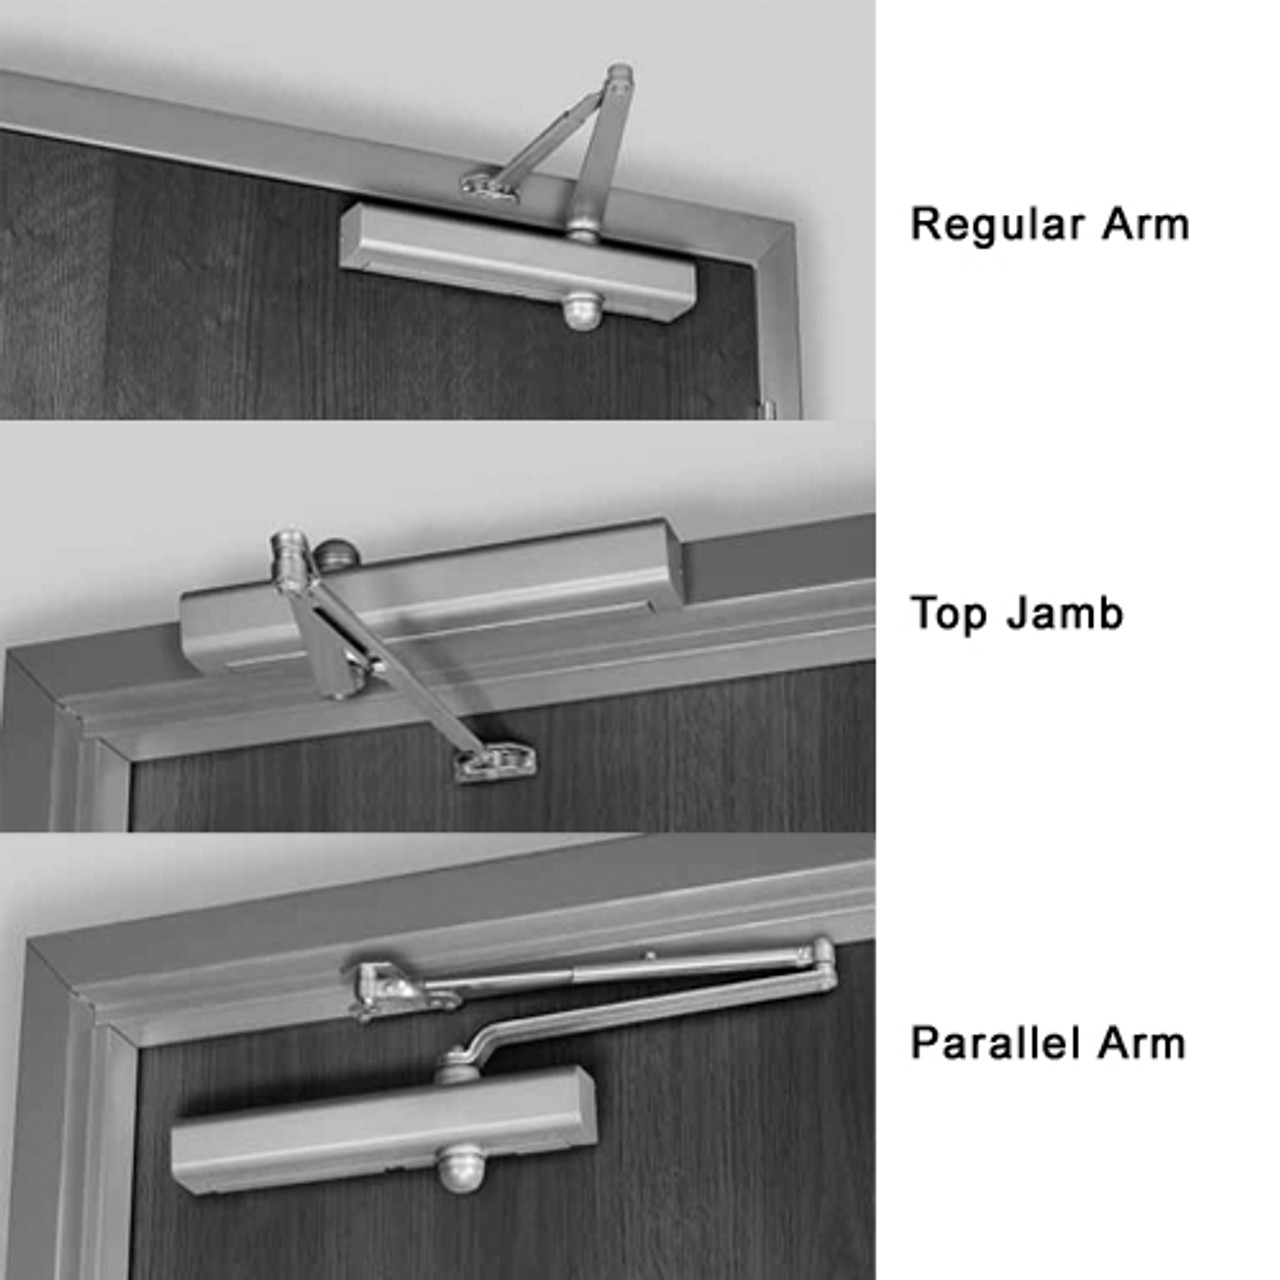 8301DA-690 Norton 8000 Series Non-Hold Open Door Closers with Regular Parallel and Top Jamb to 3 inch Reveal in Statuary Bronze Finish